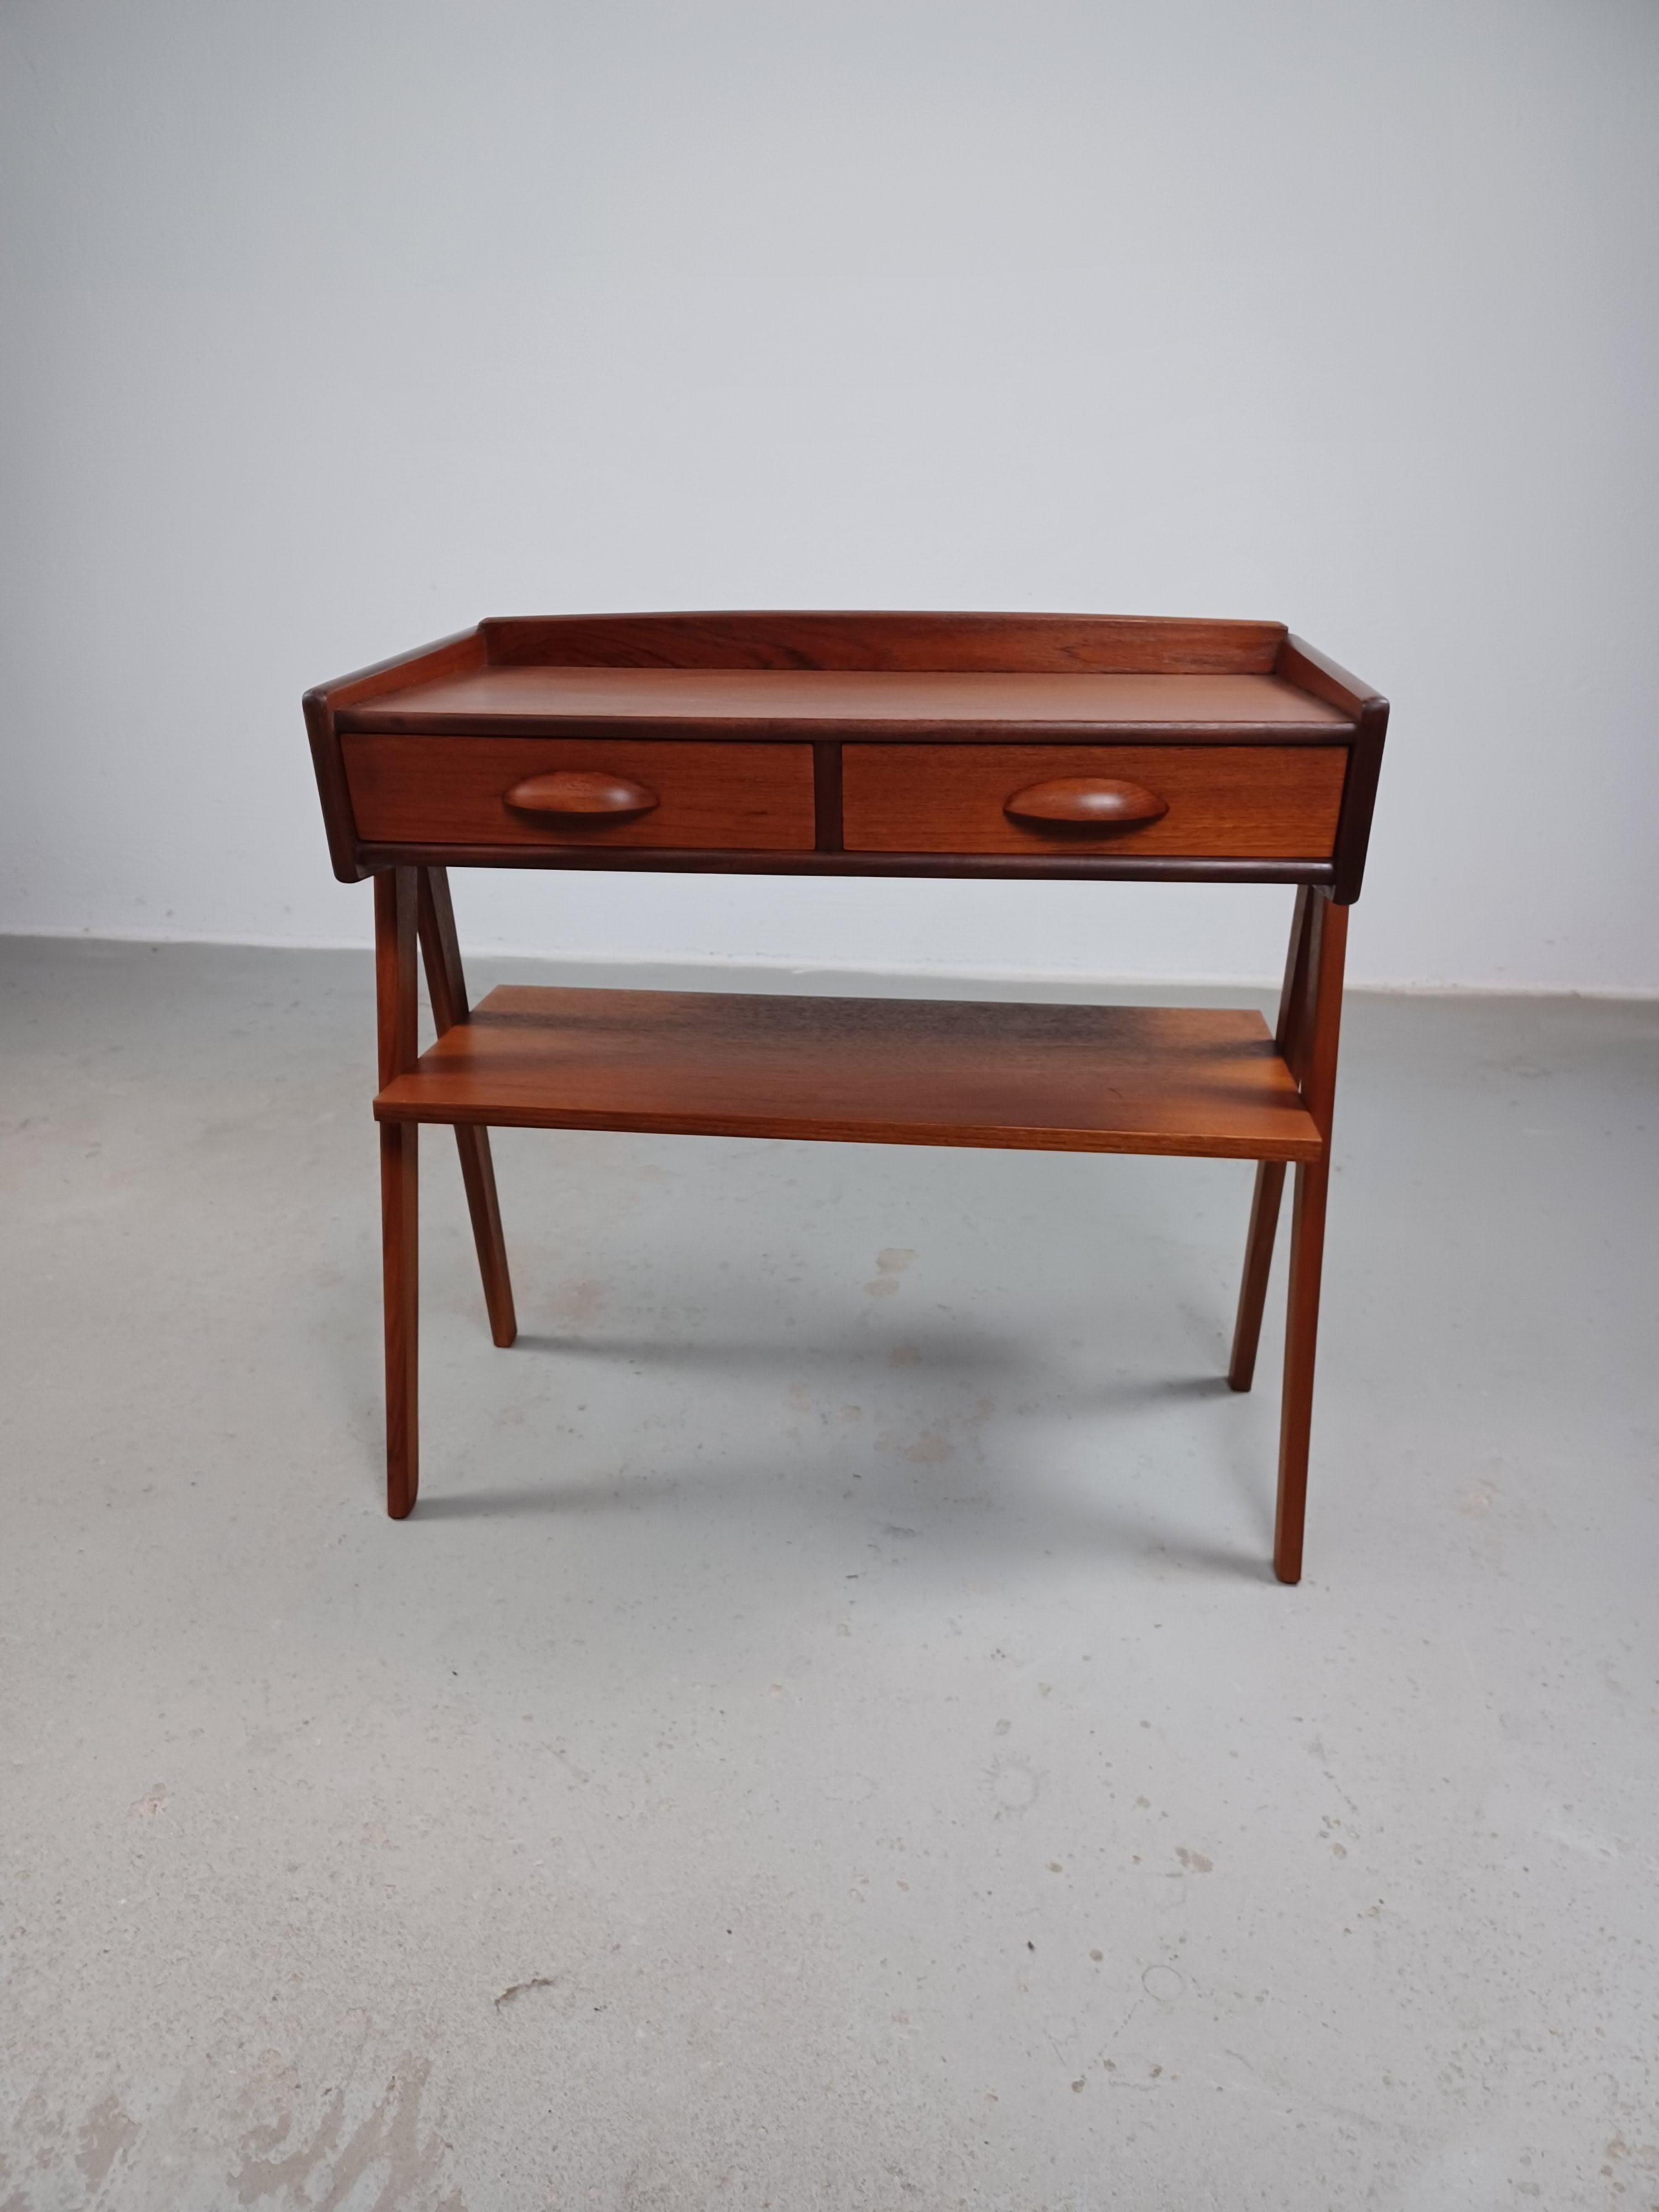 1950s fully restored Danish Røren Rasmussen entry table in teak. - shipping included.

The small entry table feature  a tabletop with two drawers with carved pulls on top of V-shaped solid legs in teak and a teak shelf.

The entry table has been